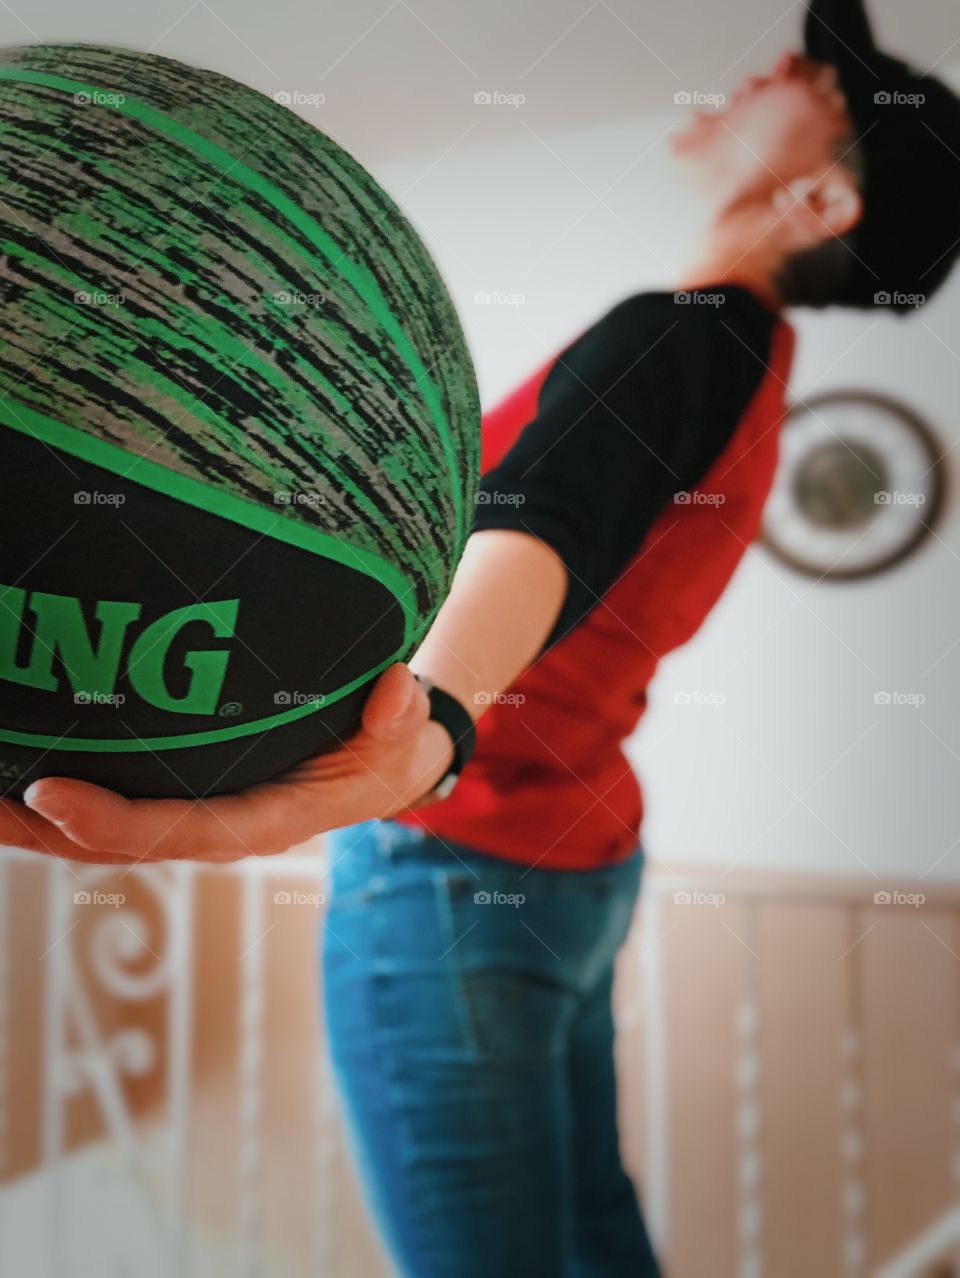 Girl With Basketball In Outstretched Hand, Basketball Pose, Spaulding Basketball, Basketball Player, Staying In Good Shape 